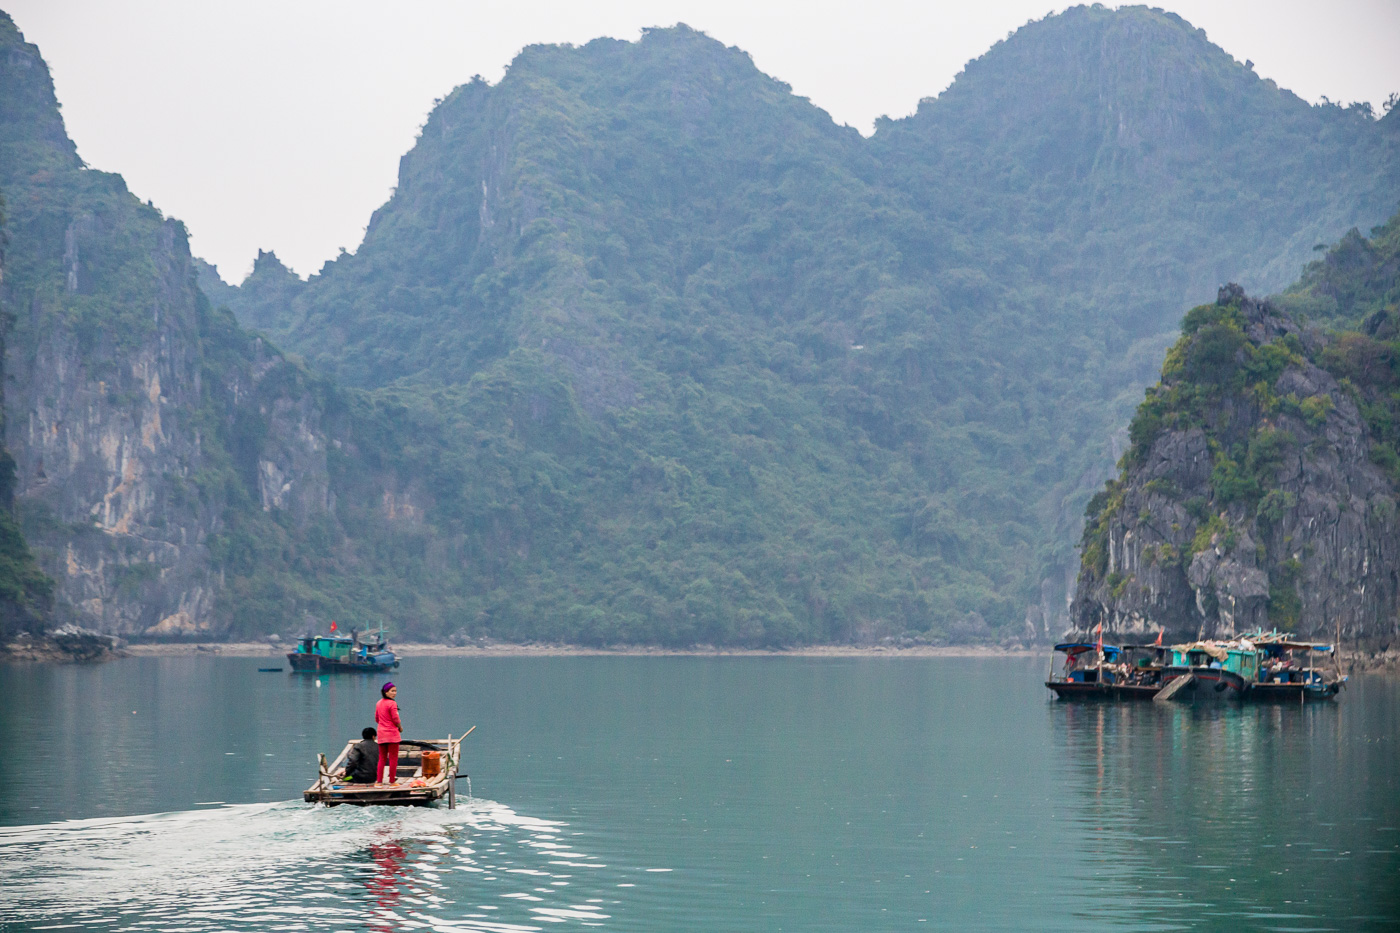 Our fishermen friends leave us after a day of fishing in Bai Tu Long Bay Halong Bay